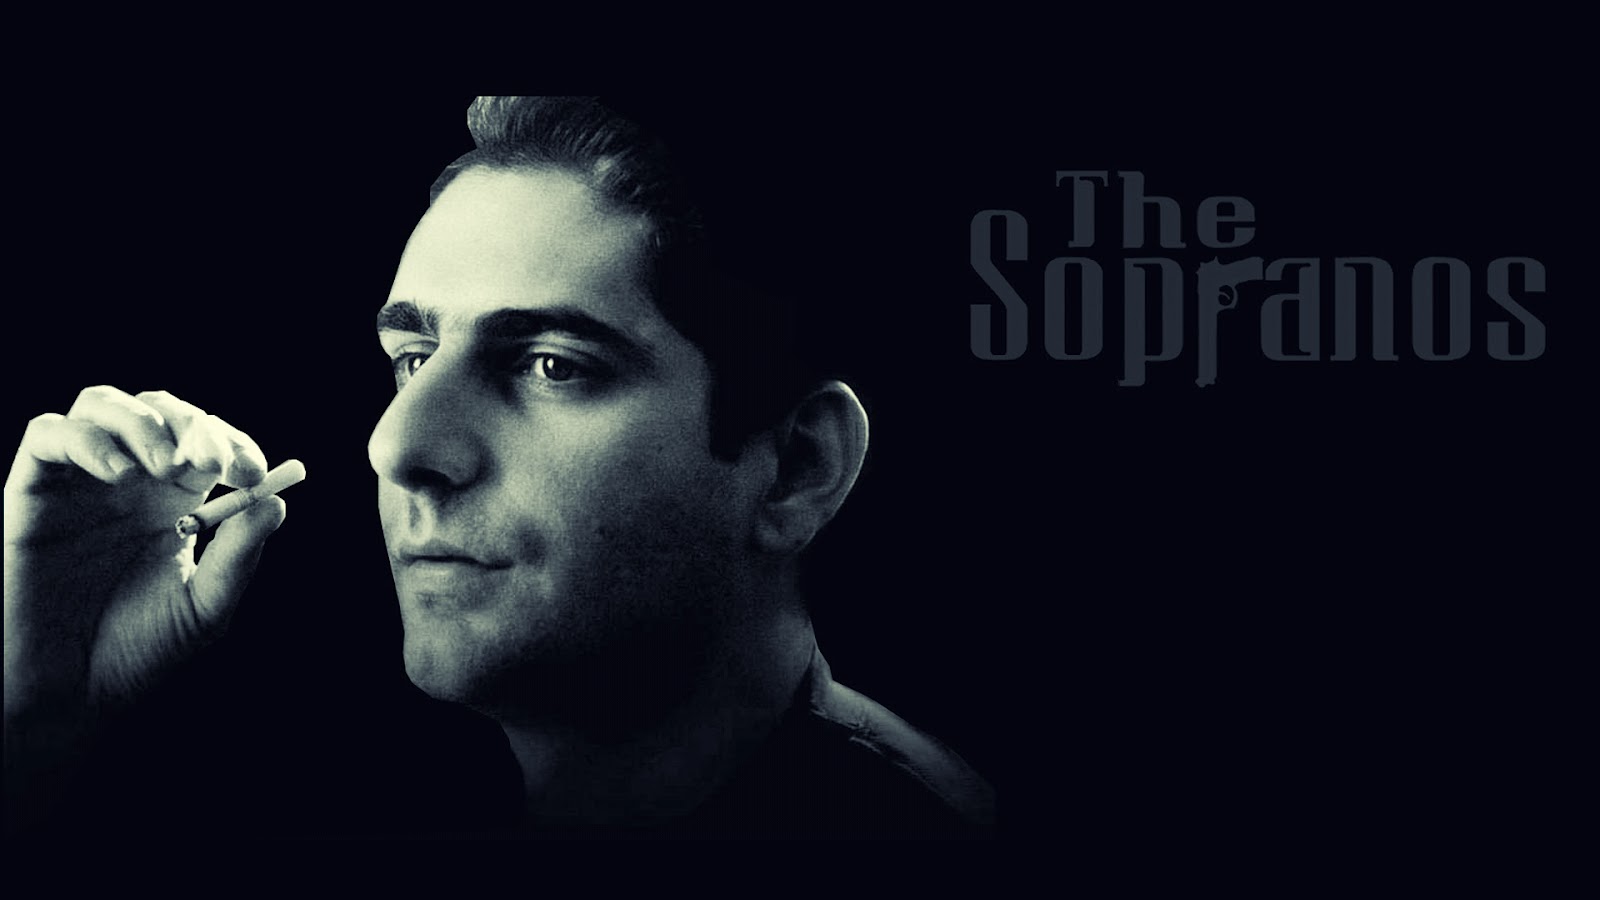 Hit Play To Listen The Sopranos Theme Music While You Check Out